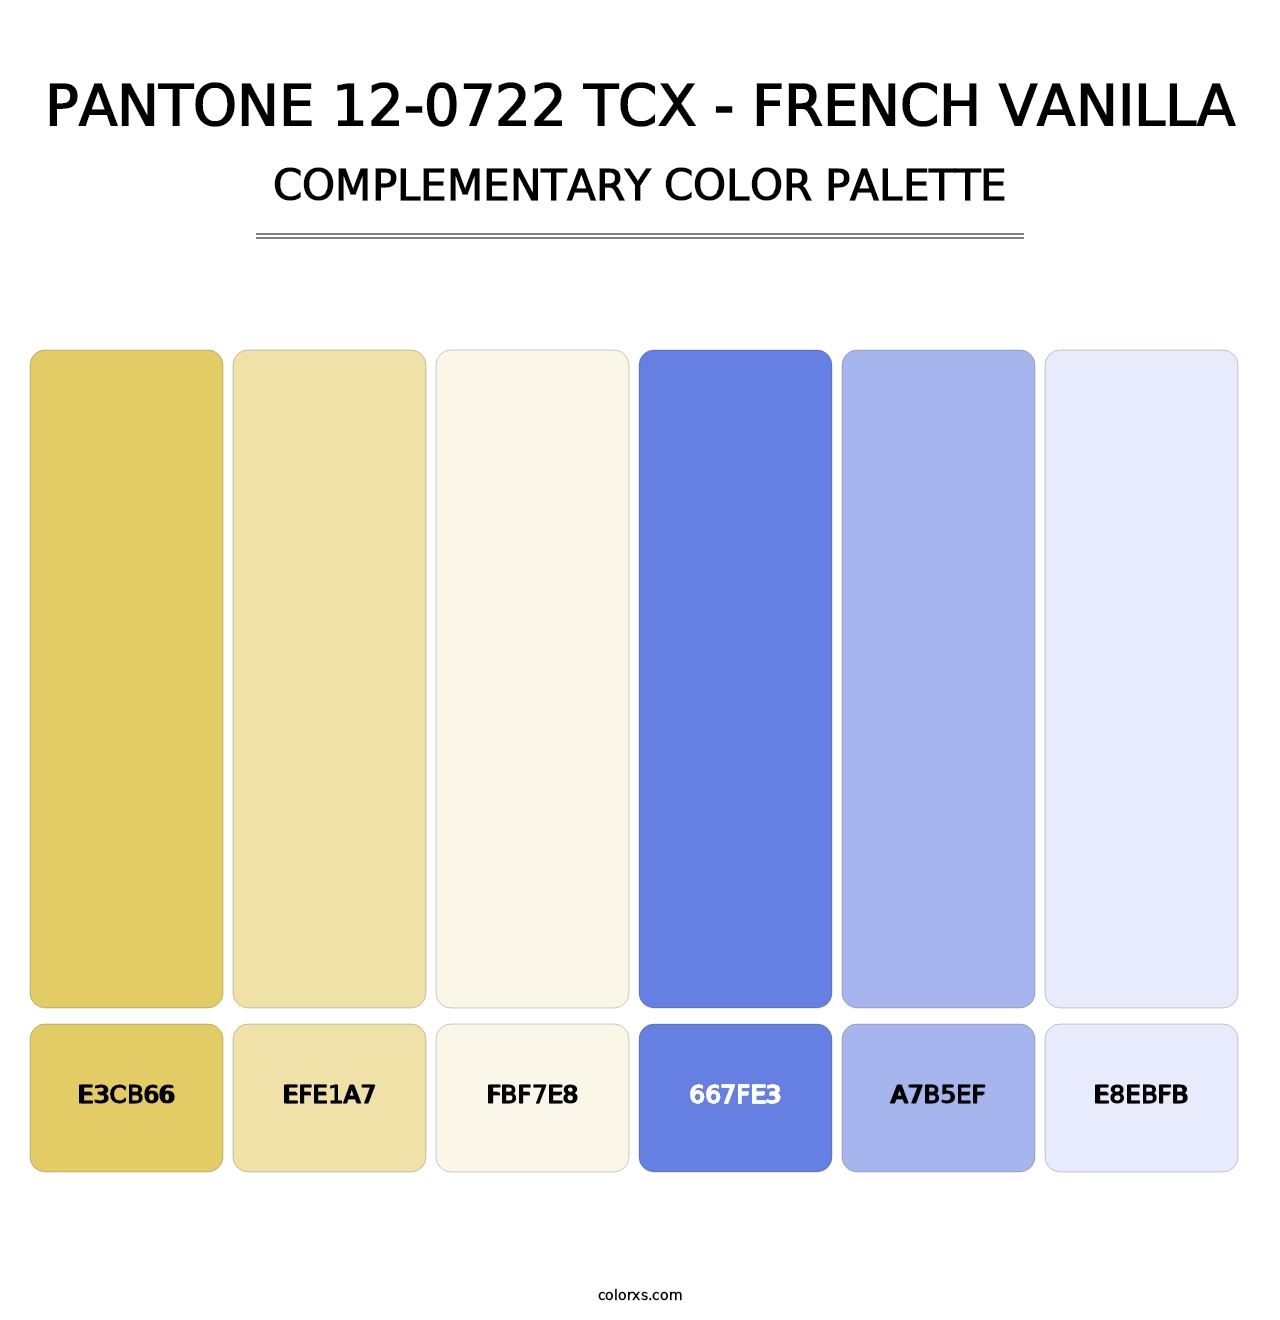 PANTONE 12-0722 TCX - French Vanilla - Complementary Color Palette